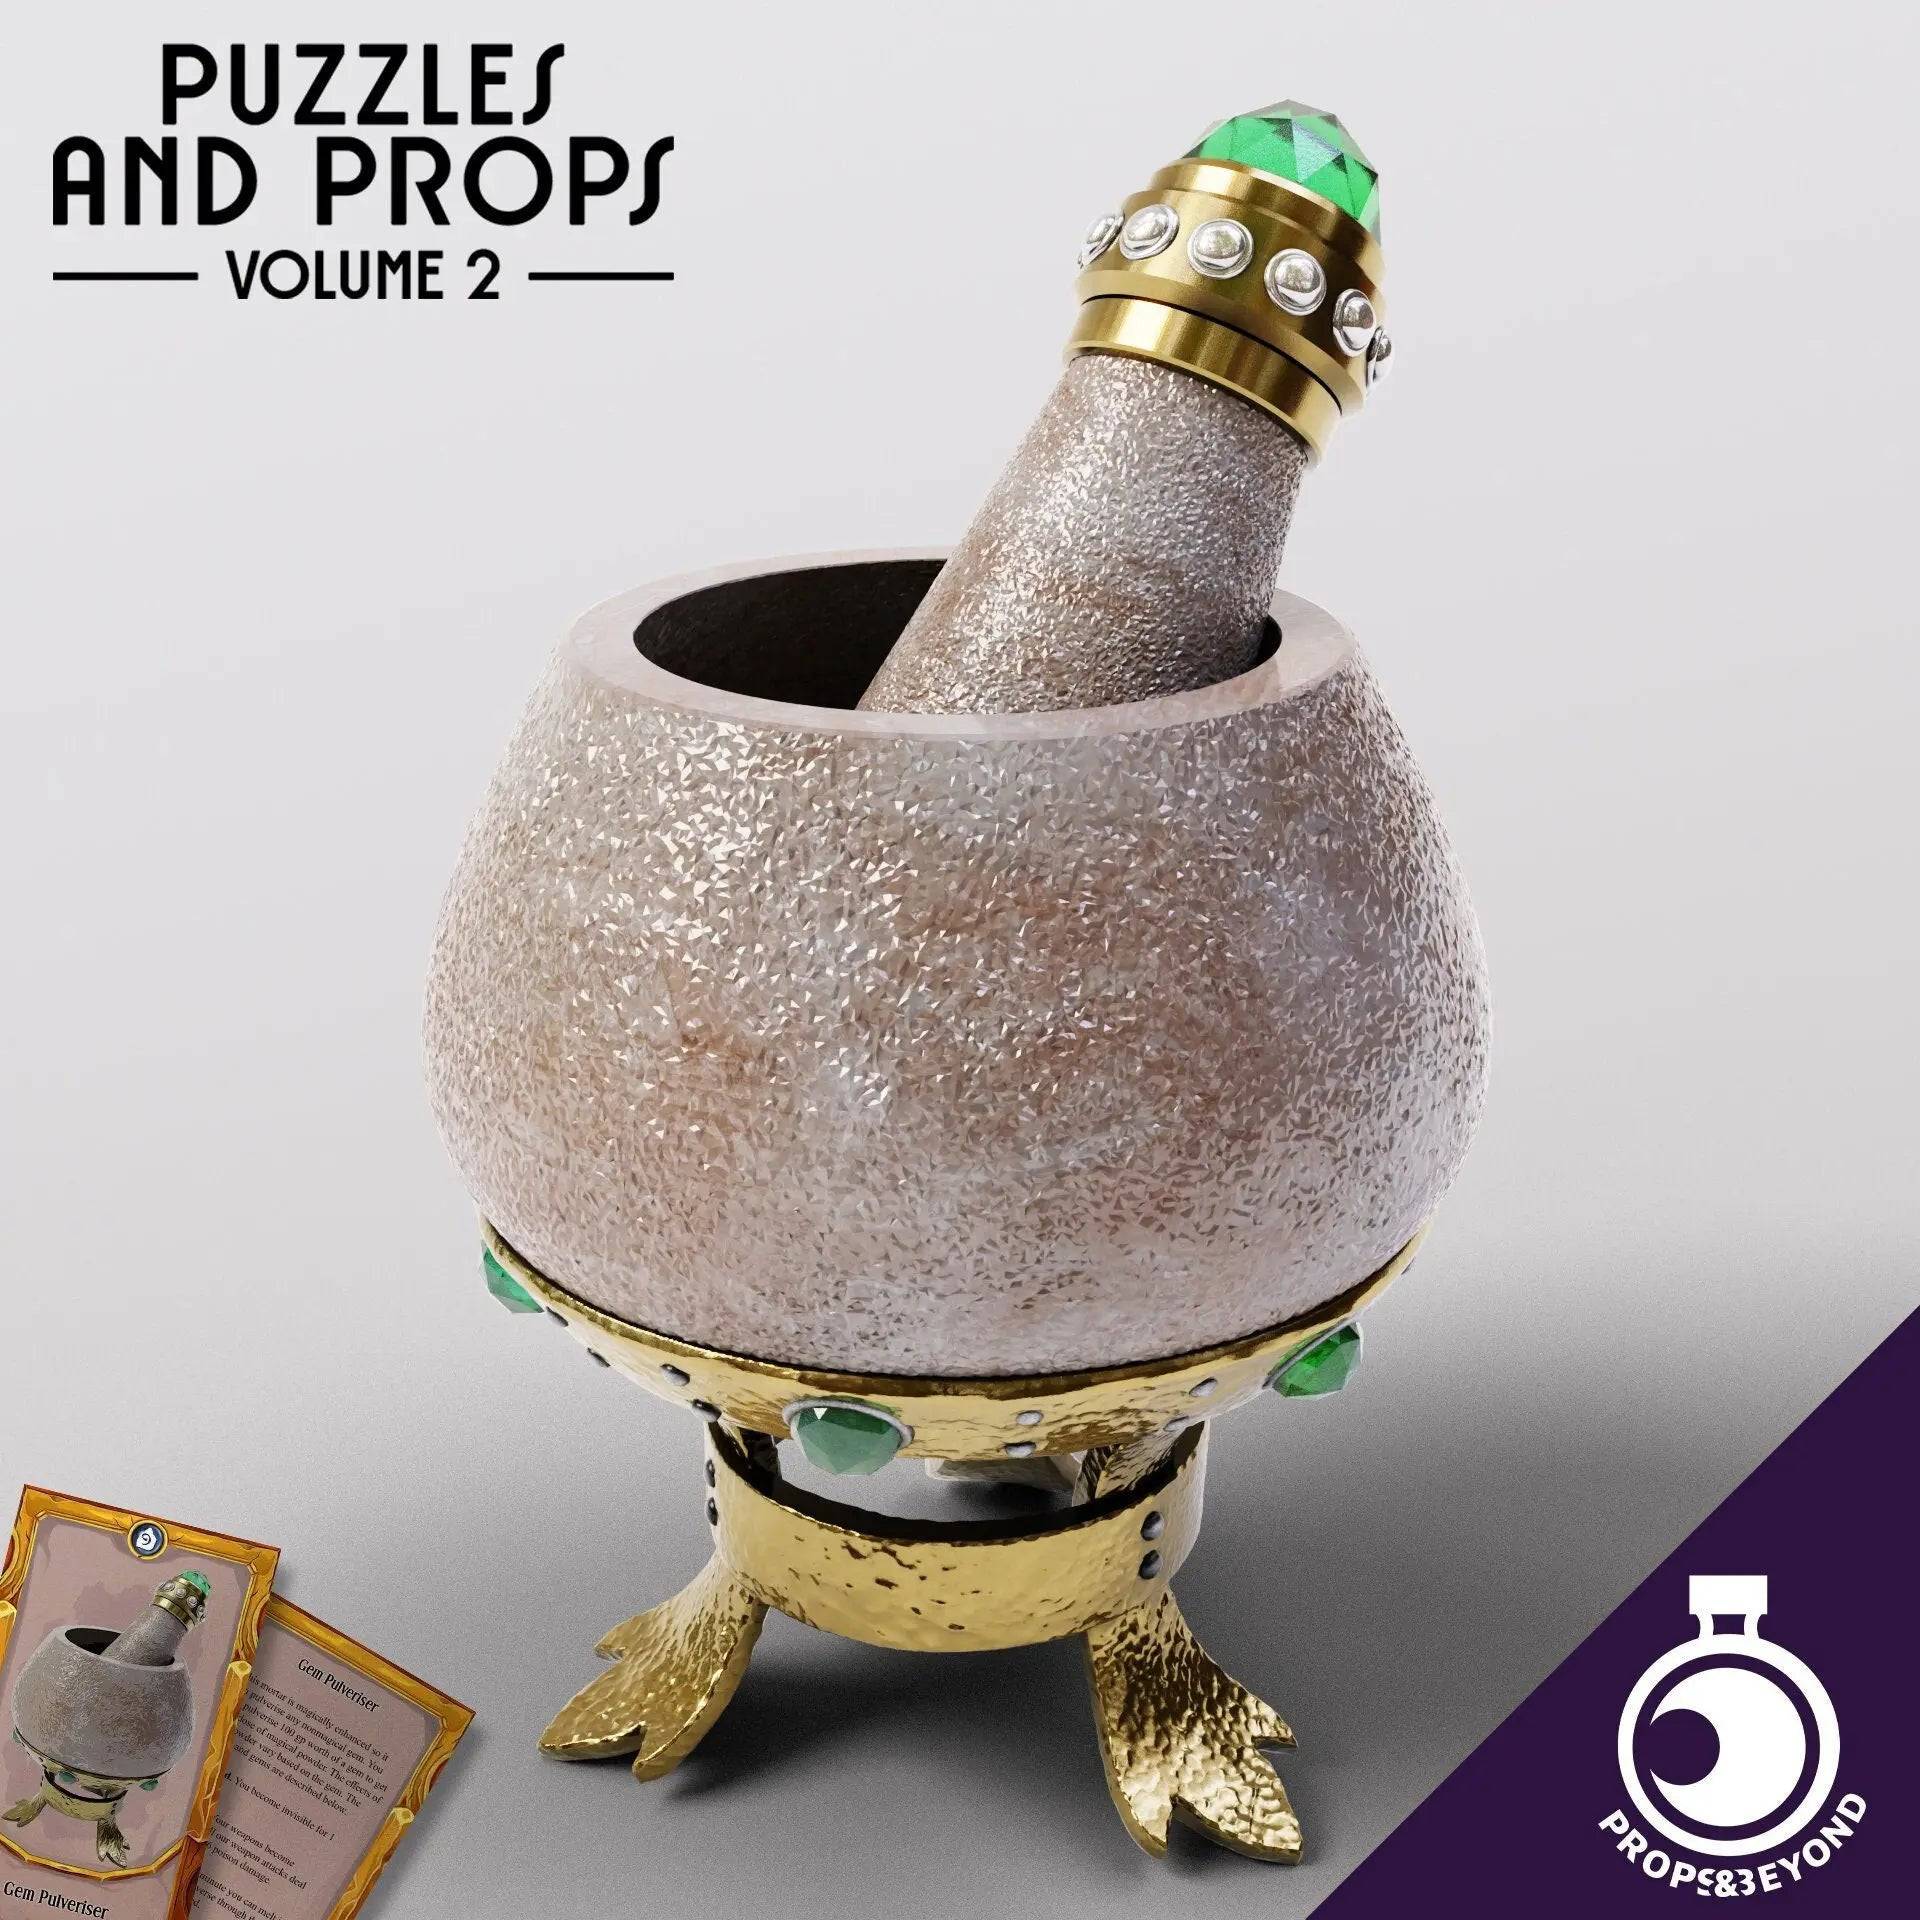 Alchemy Utensils - Mortar and Pestle | TTRPG LARP Gaming Prop | Puzzles & Props - Tattles Told 3D